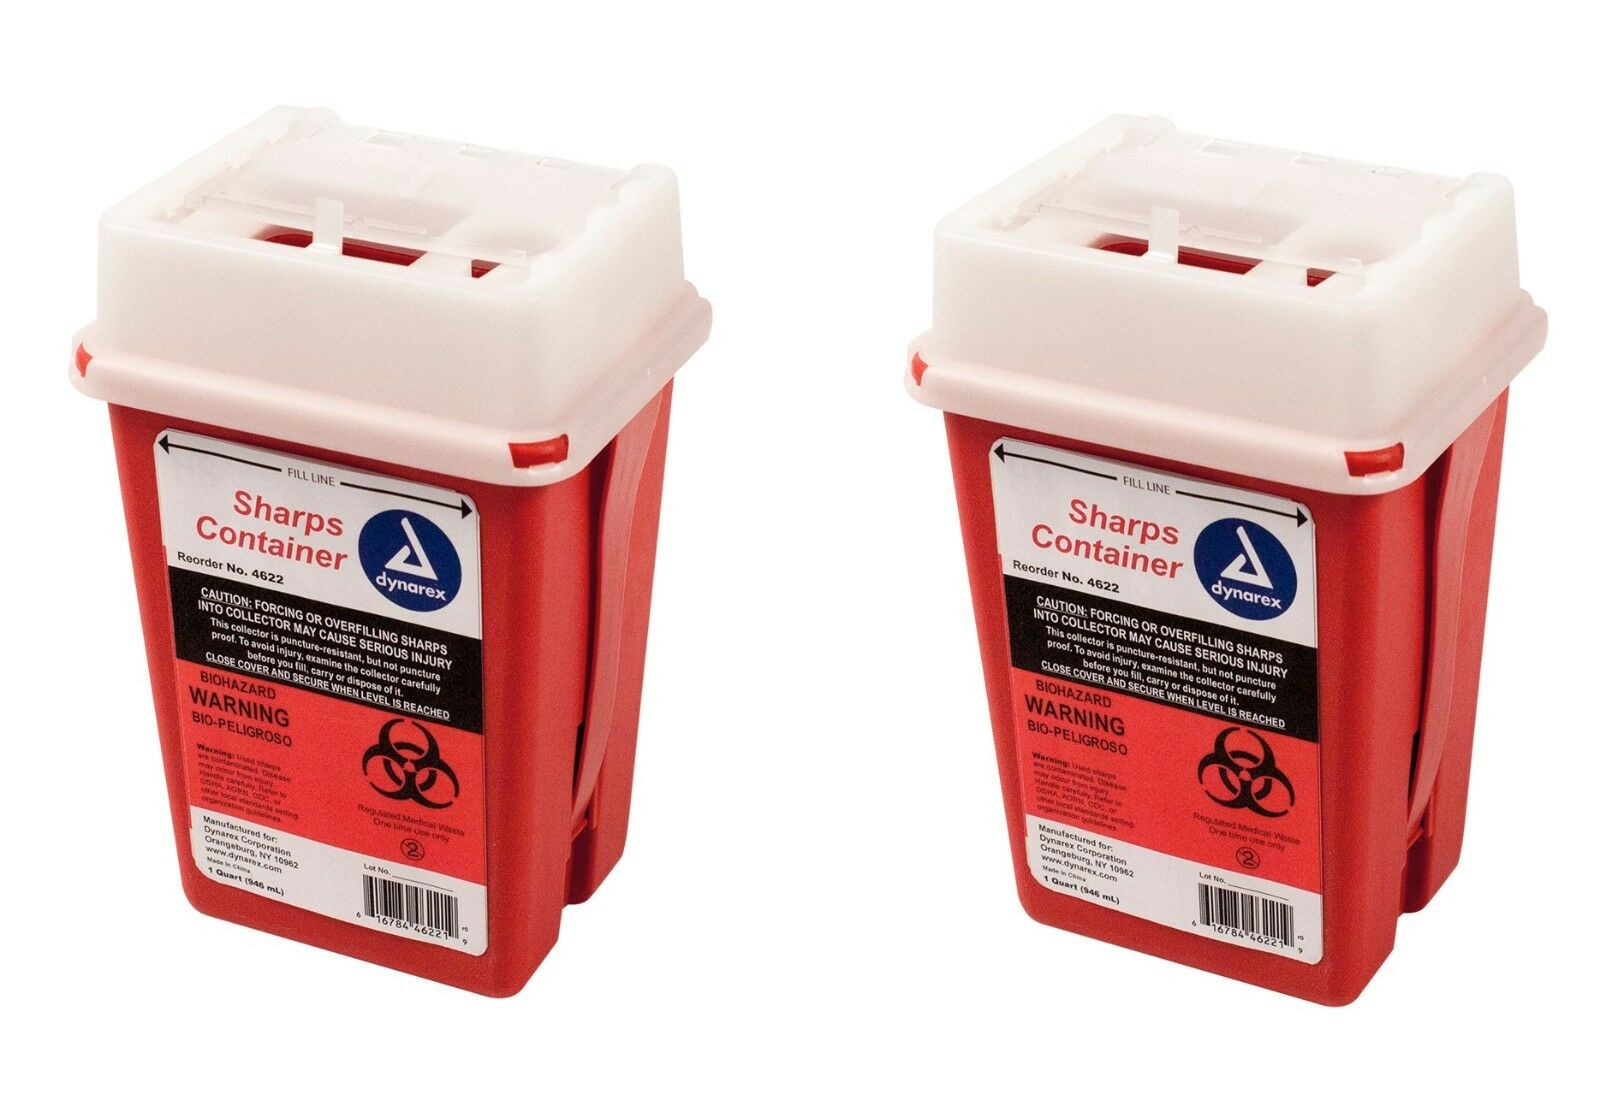 Sharps Container Biohazard Needle Disposal 1 Qt Size Medical-dental-tattoo 2ea